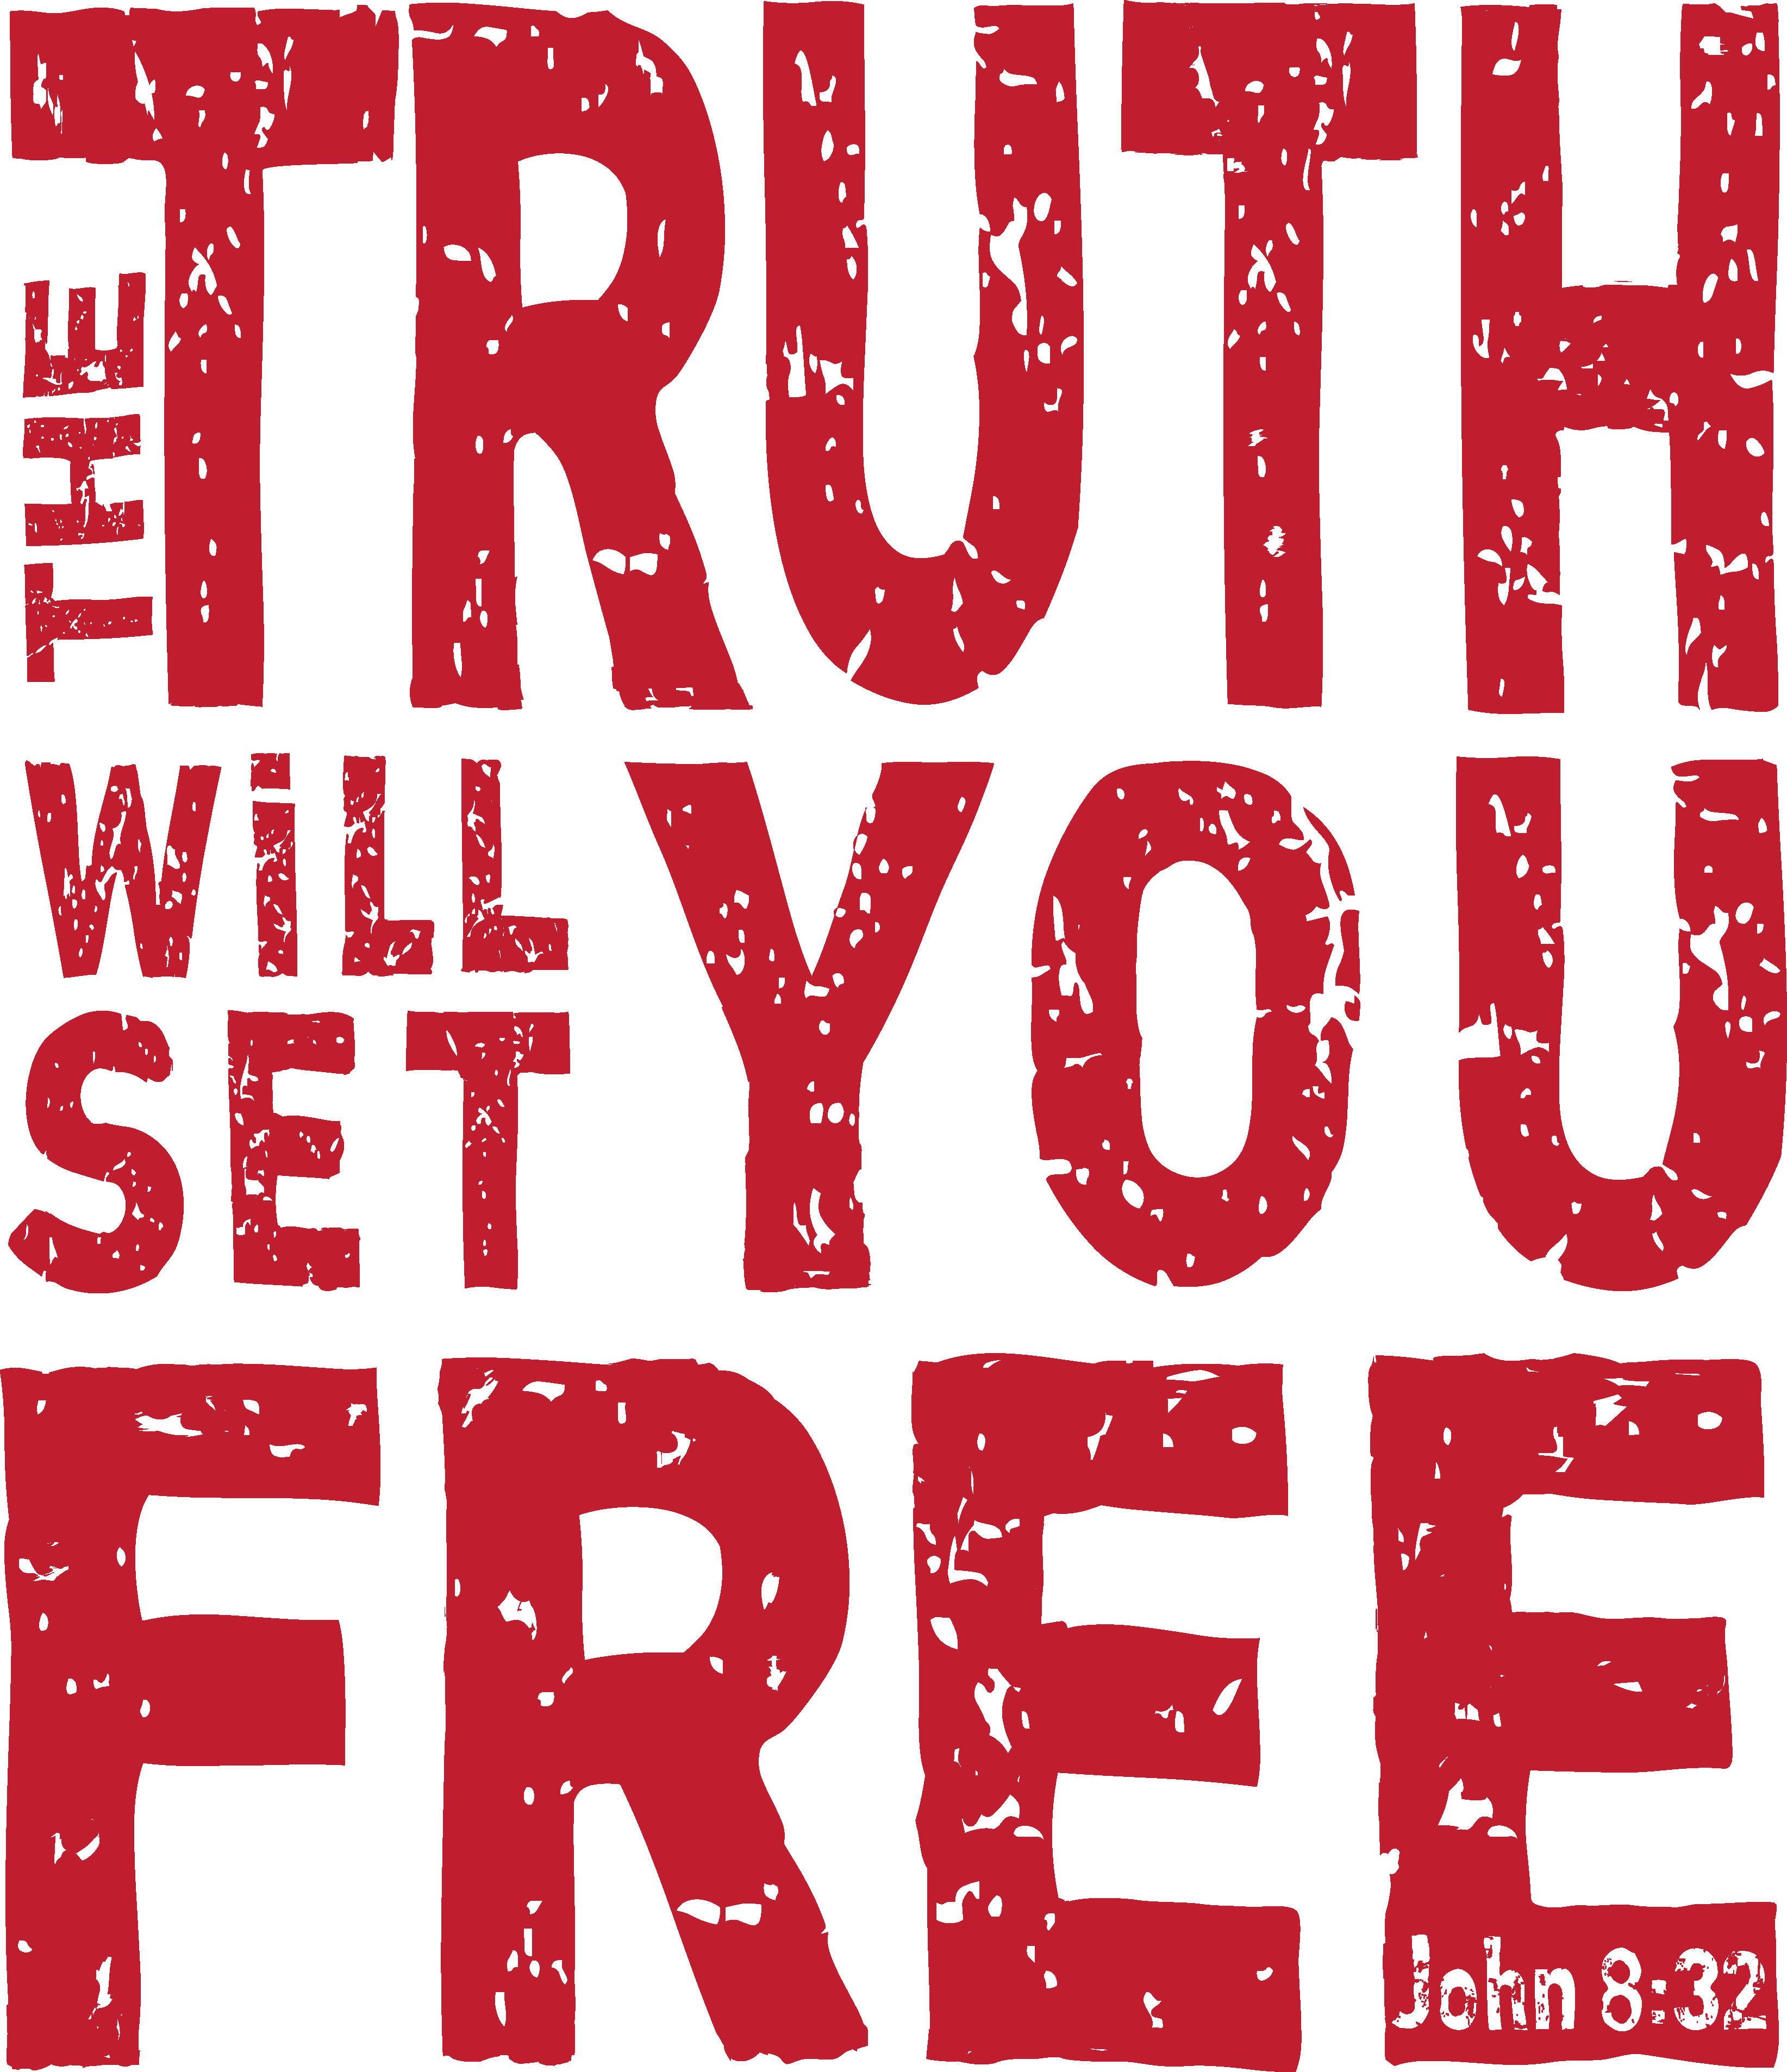 Ladies Classic Fit Crew - The Truth Will Set You Free